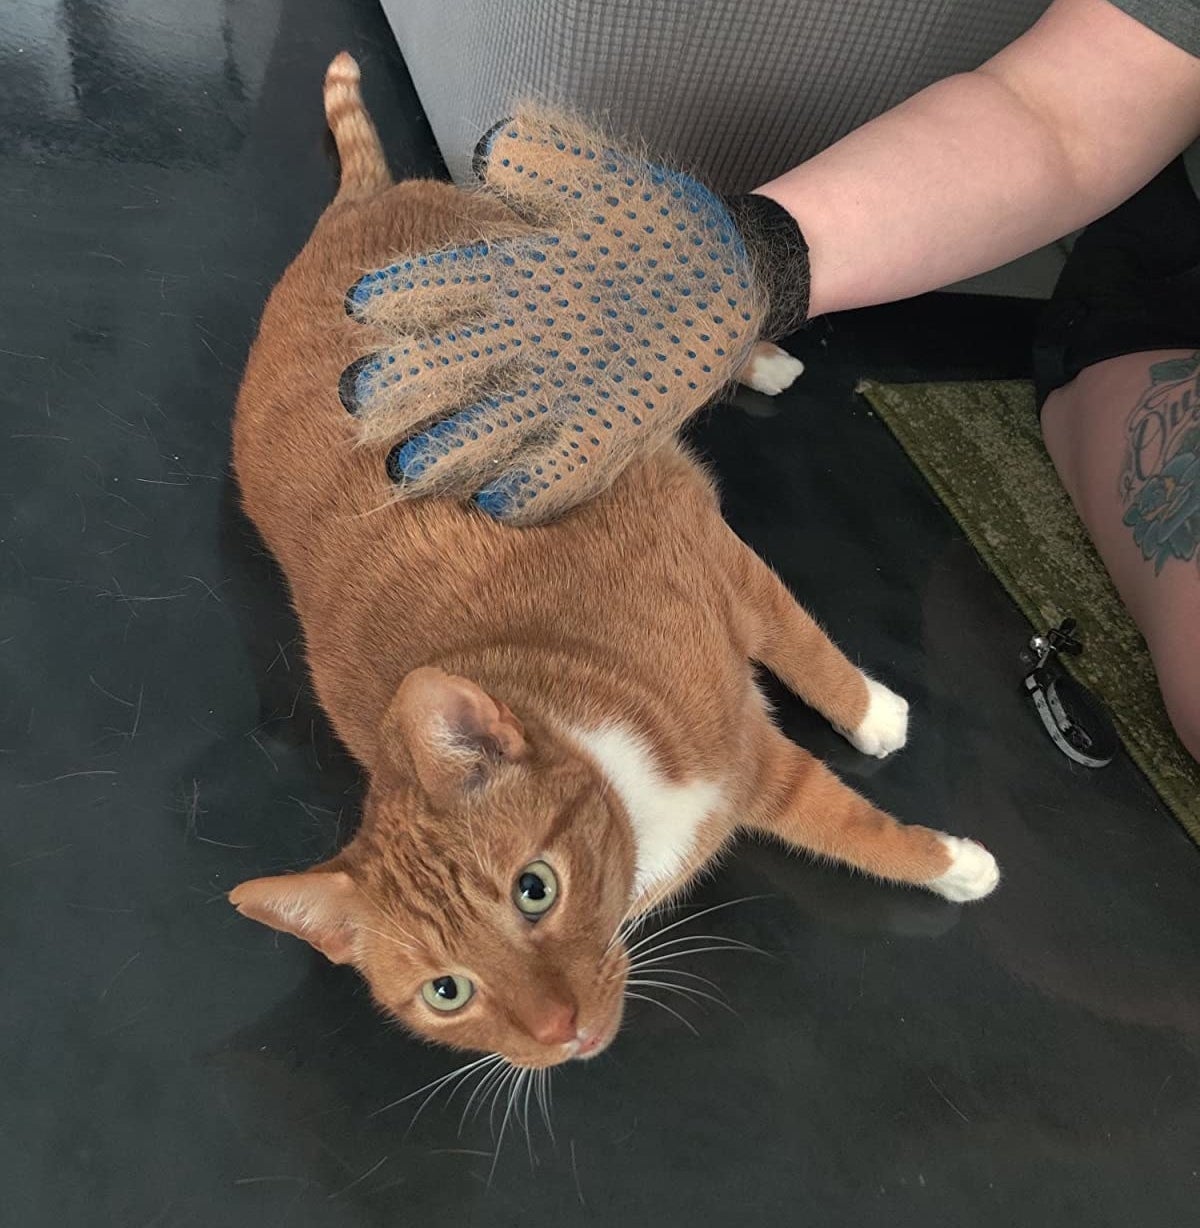 The grooming glove with silicone nodules, full of hair held in front of a cat